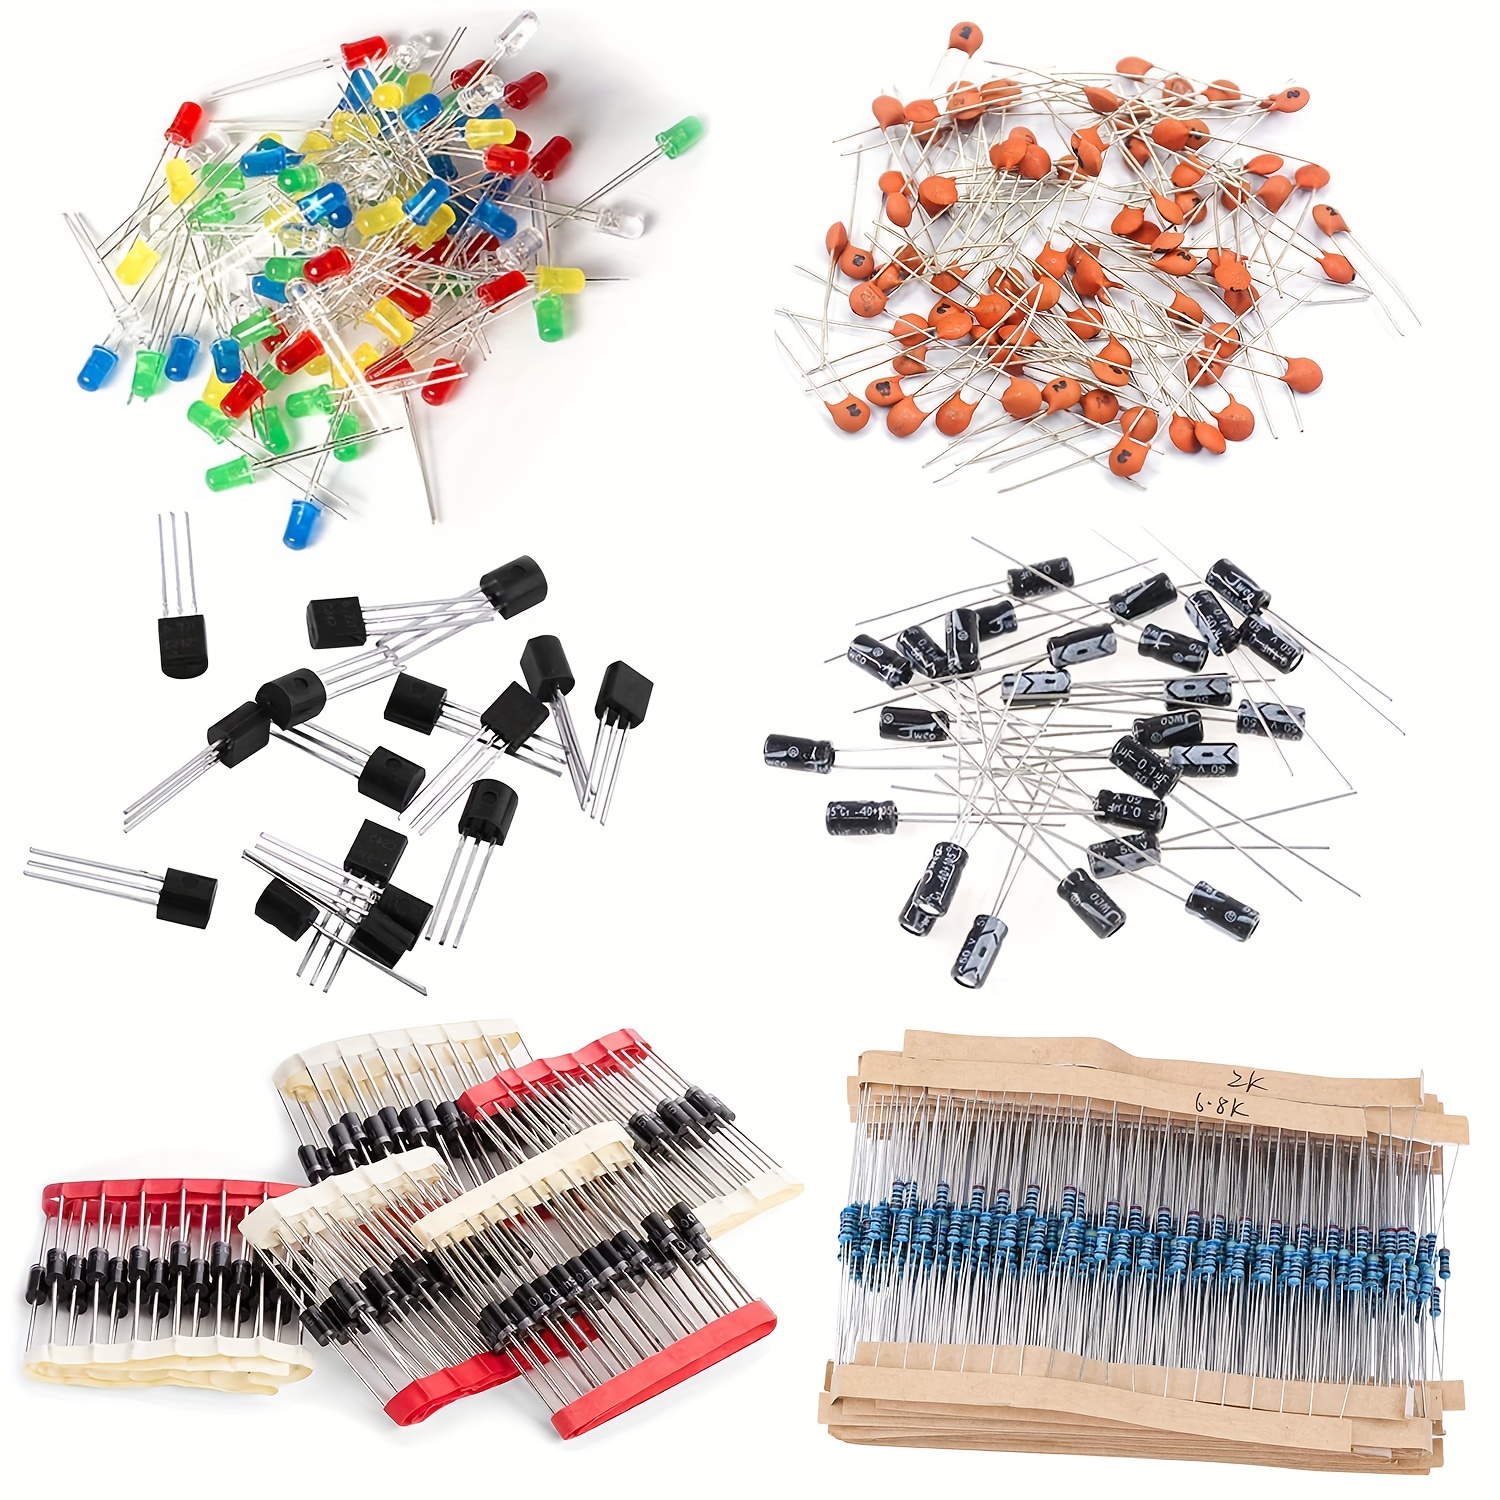 1400pcs basic electronics component assortment kit electrolytic capacitor ceramic capacitor led diode common diode resistor transistor component for arduino electronic diy project